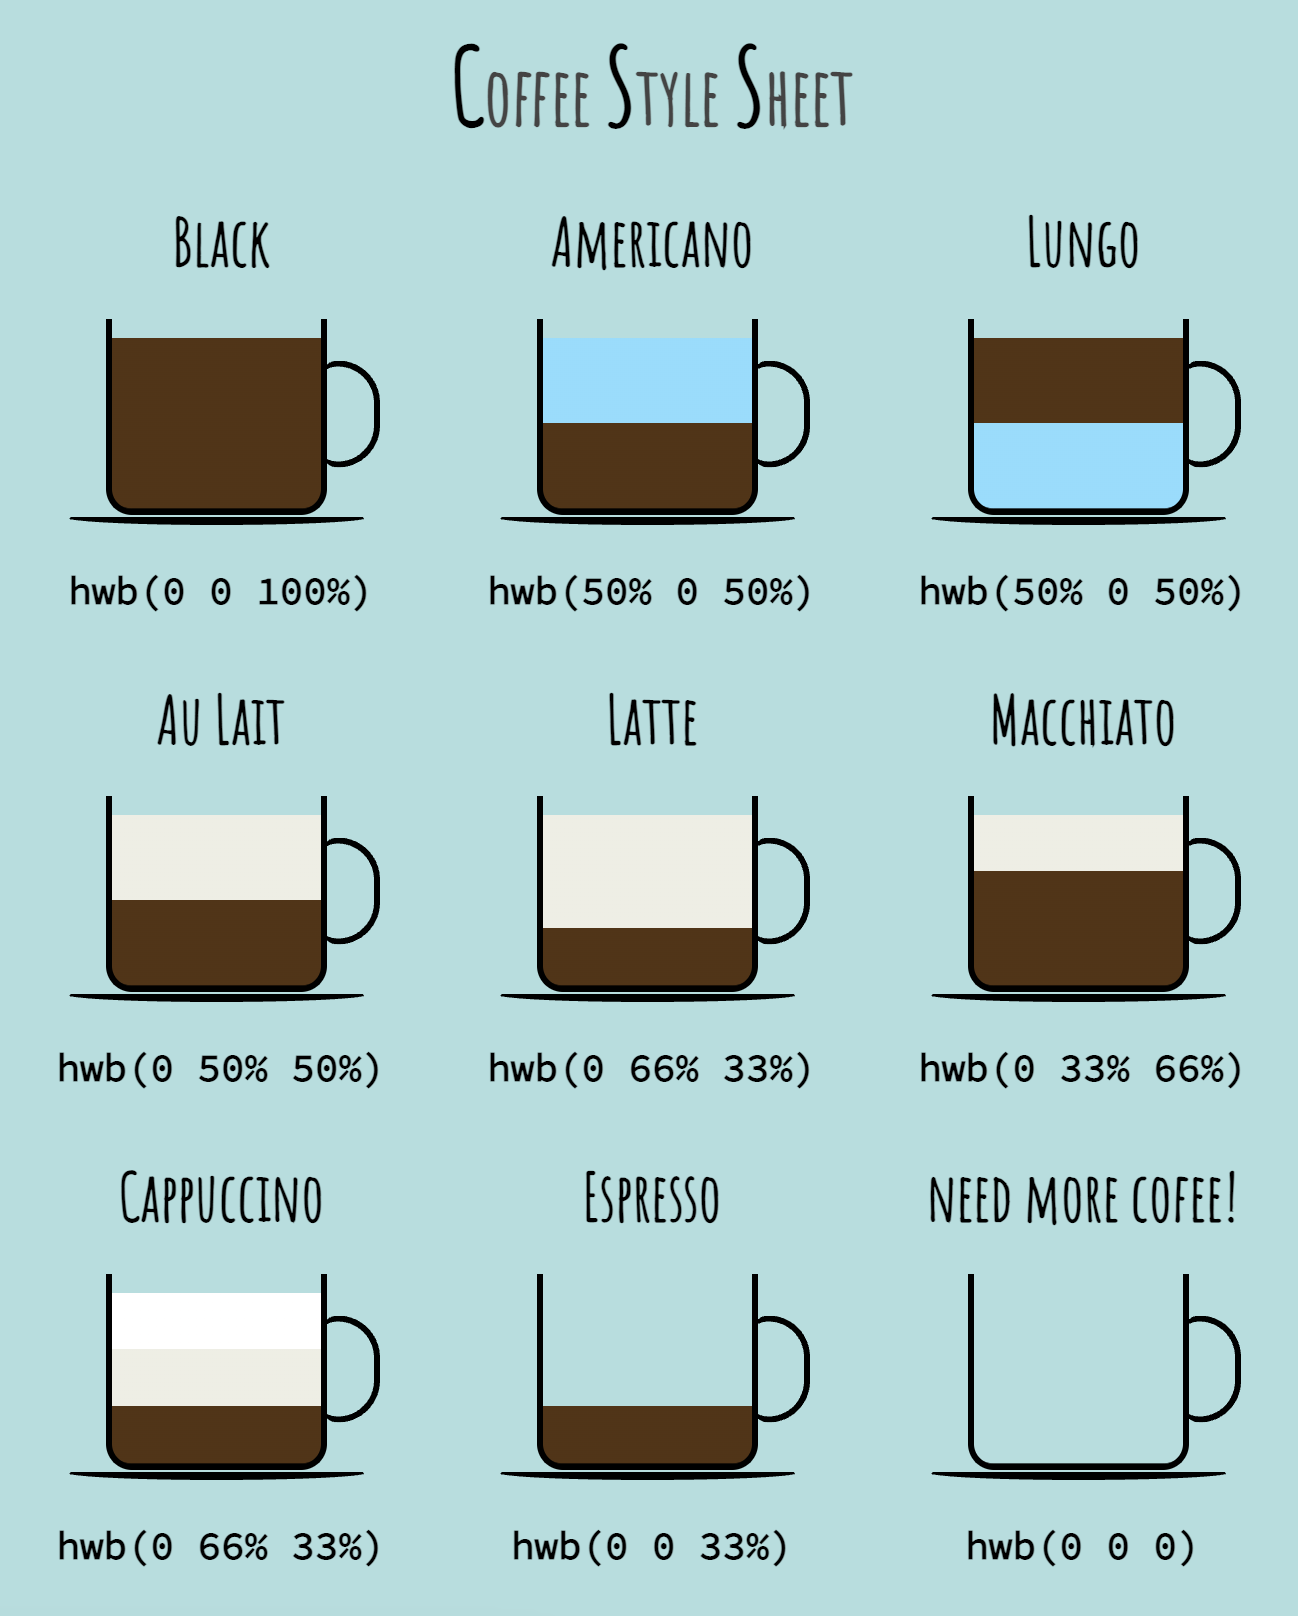 Cartoon titled 'Coffee Style Sheet' with different types of coffee described as CSS colors. Black coffee is hwb(0 0 100%), Americano is hwb(50% 0 50%), Lungo is hwb(50% 0 50%), cafe au lait is hwb(0 50% 50%), latte is hwb(0 66% 33%), macchiato is hwb(0 33% 66%), cappuccino is hwb(0 66% 33%), espresso is hwb(0 0 33%), and 'Need more coffee!' is hwb(0 0 0).